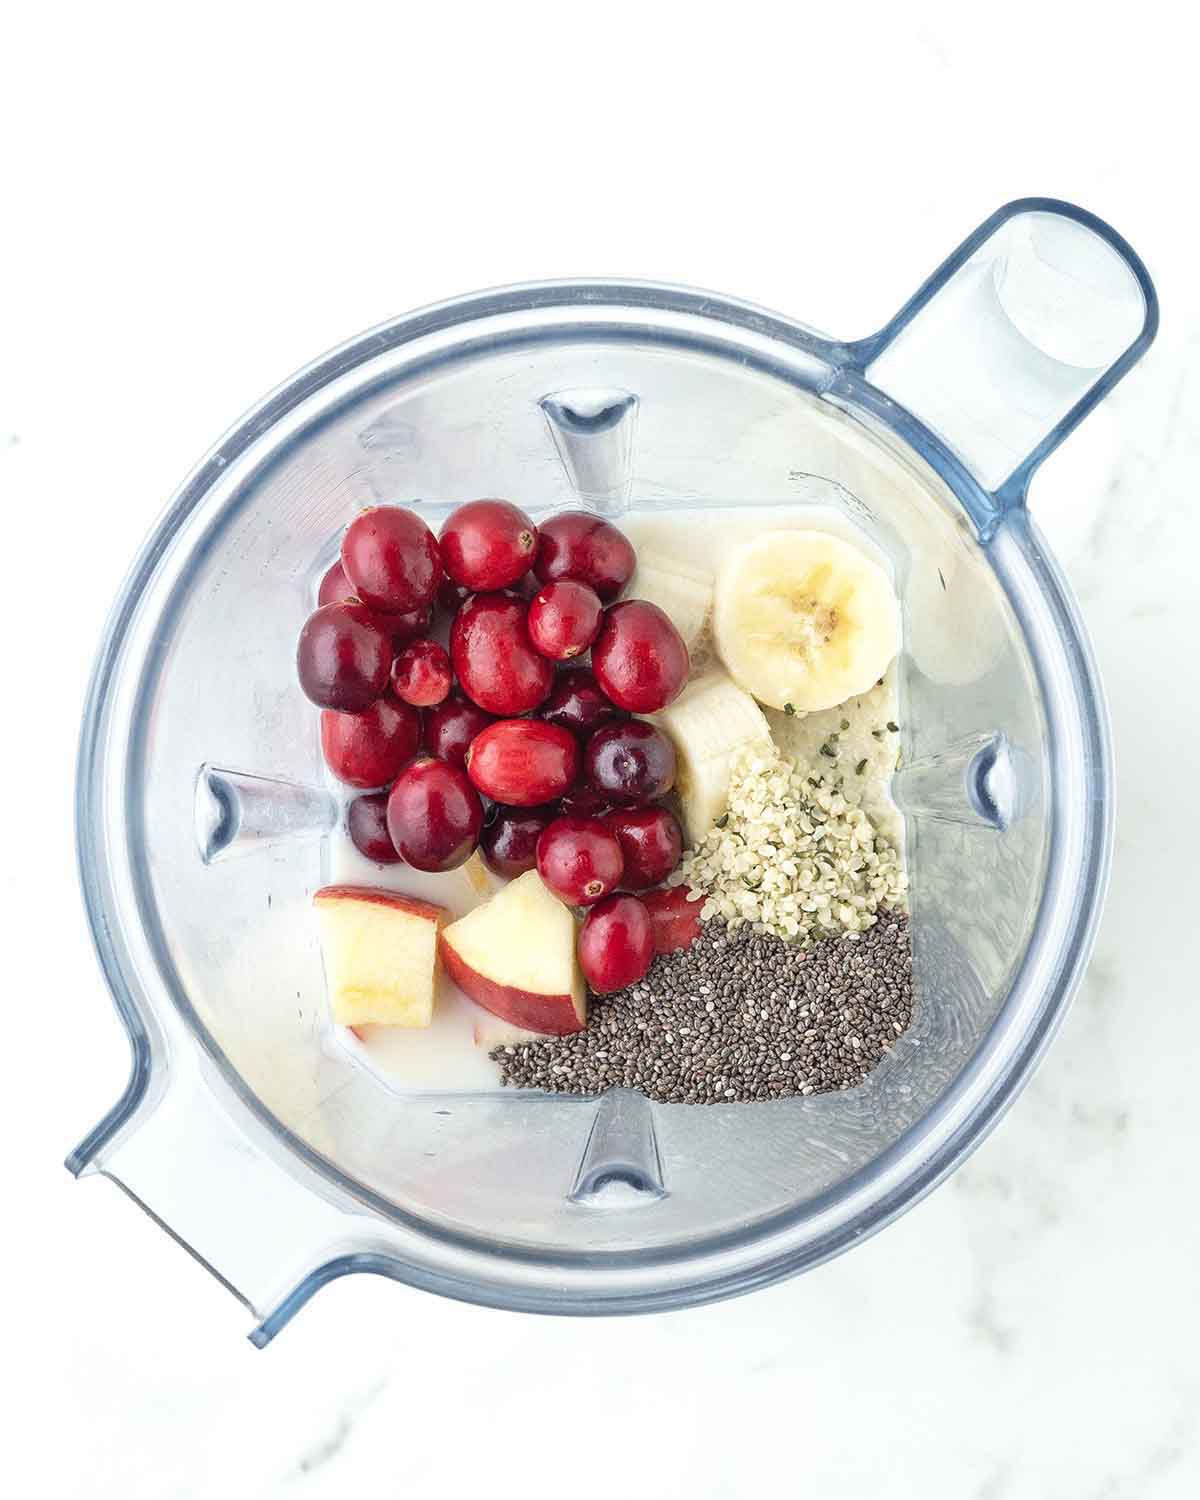 An overhead image showing the ingredients for a cranberry apple smoothie in a blender canister just before being blended.